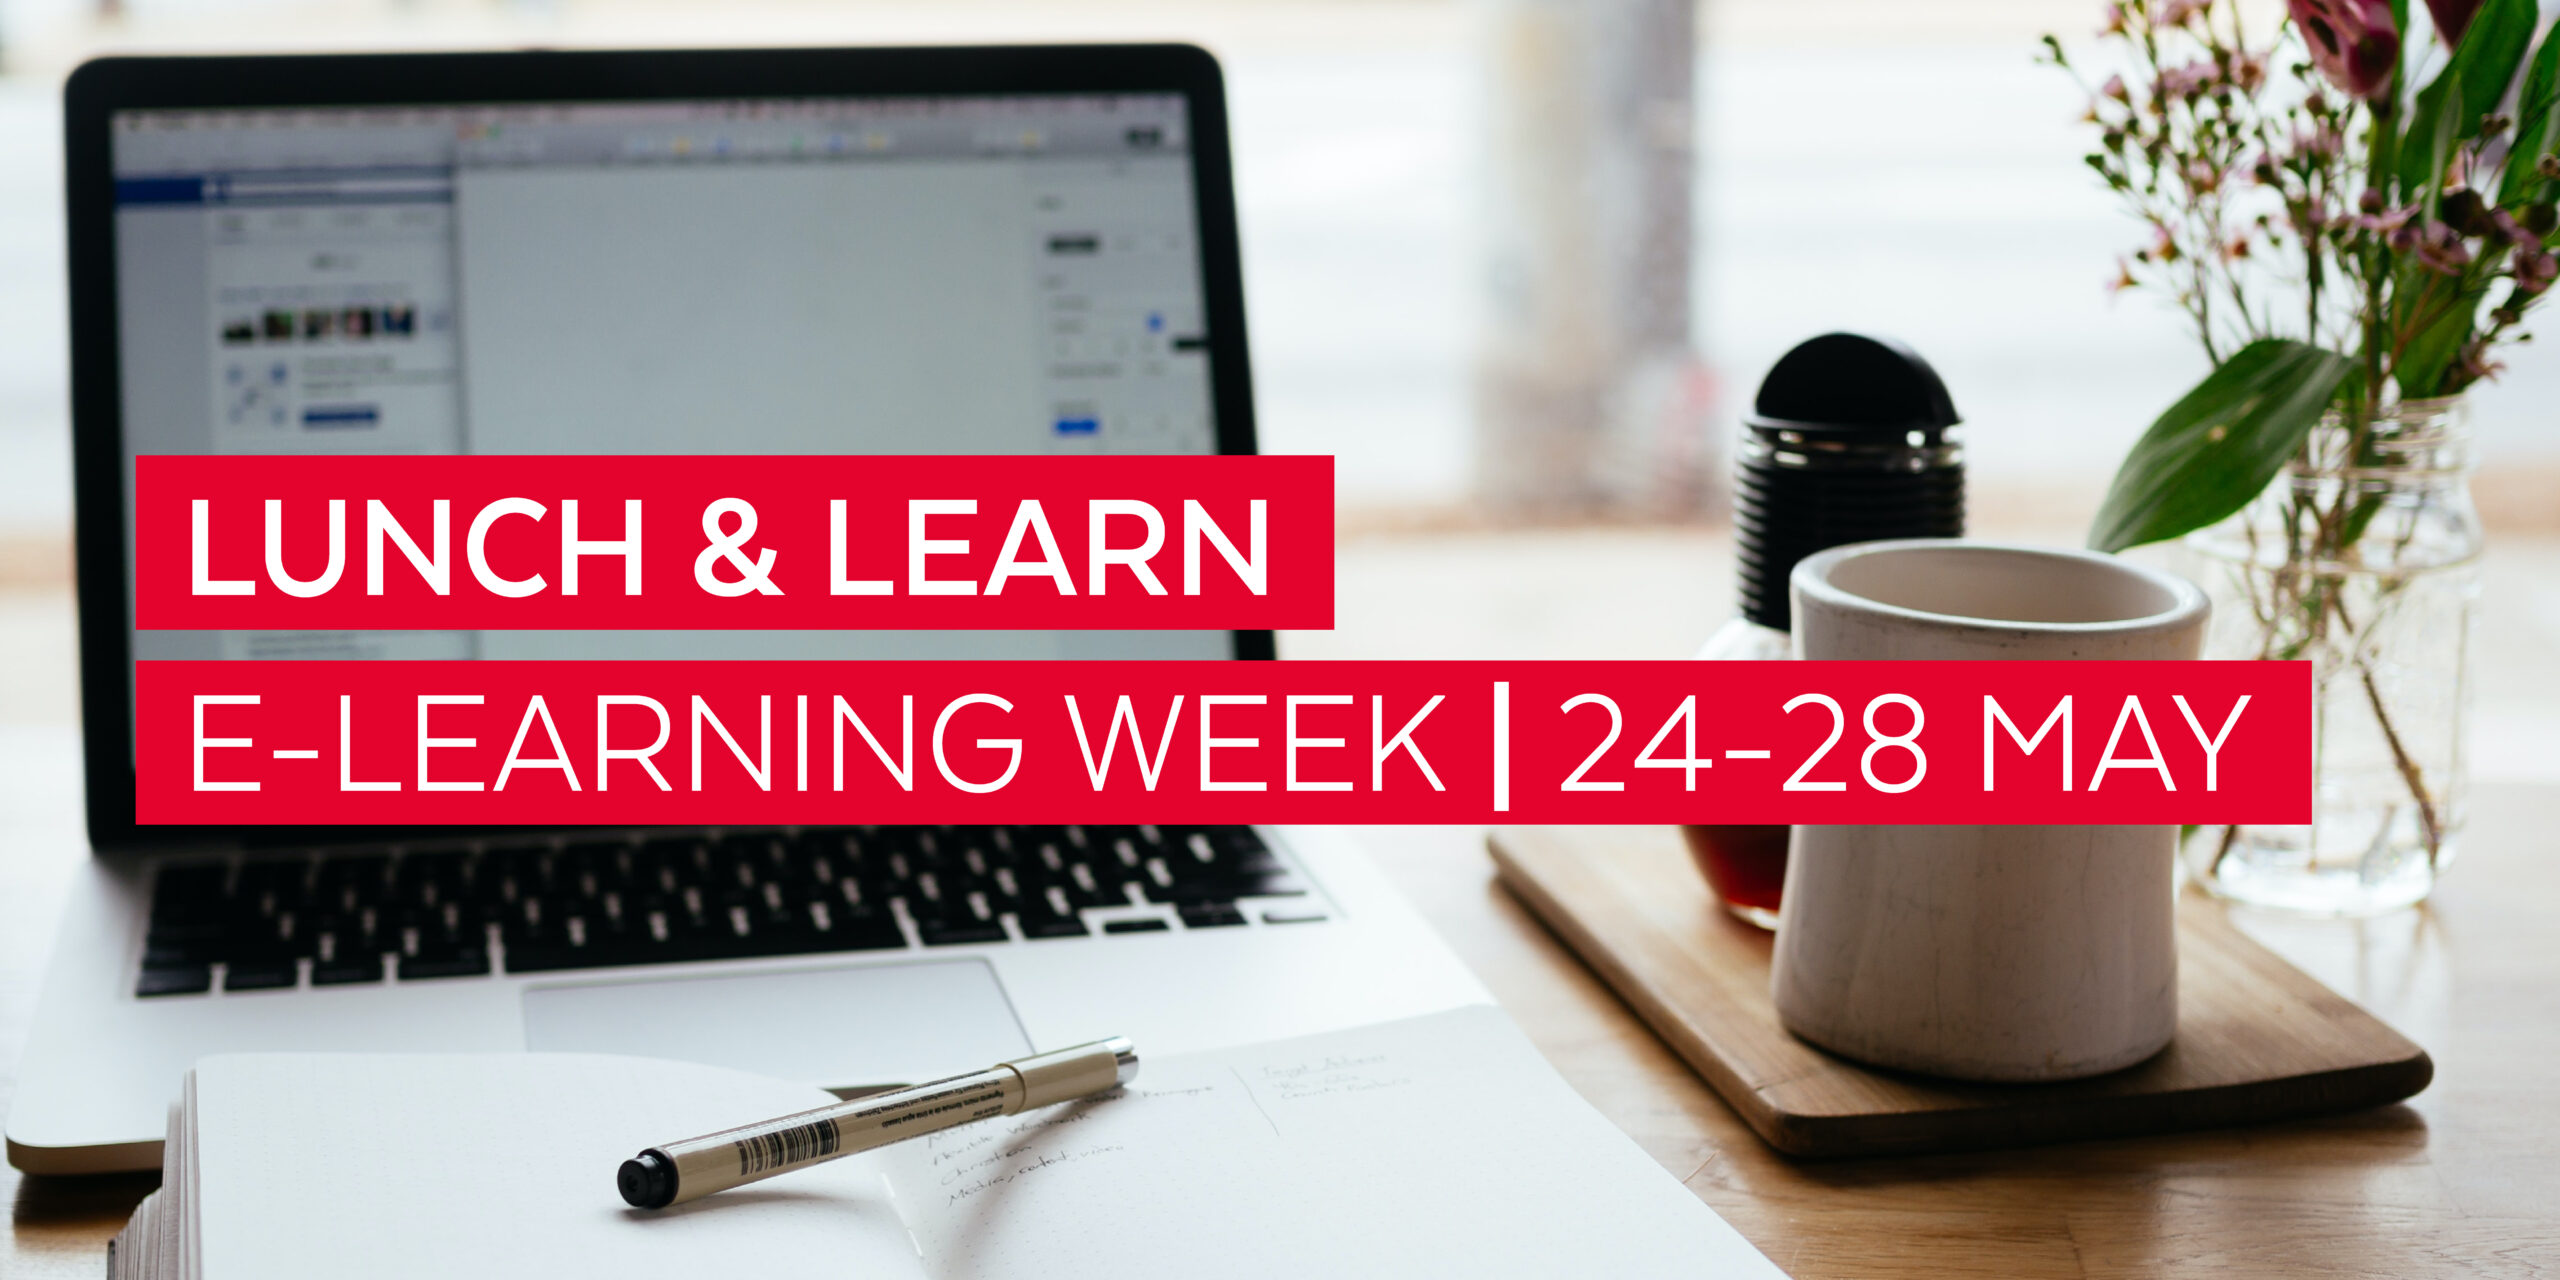 Lunch & Learn e-learning week | 24-28 May with Legal Network | Hugh James